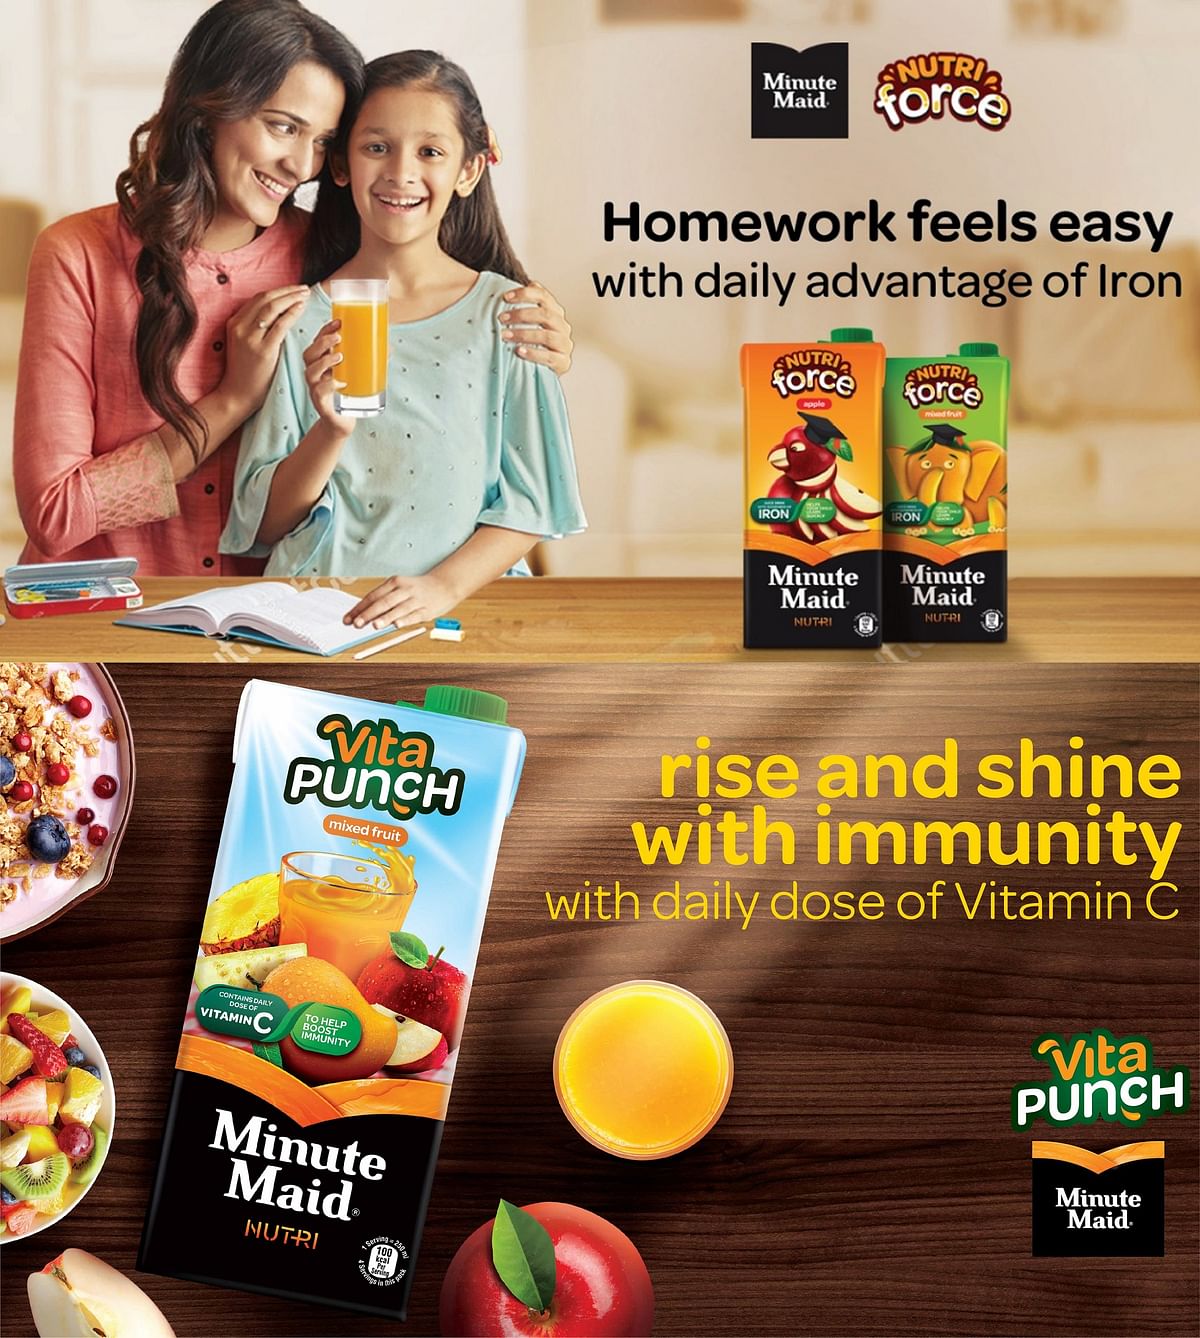 Minute Maid Nutri Force and Minute Maid Vita Punch